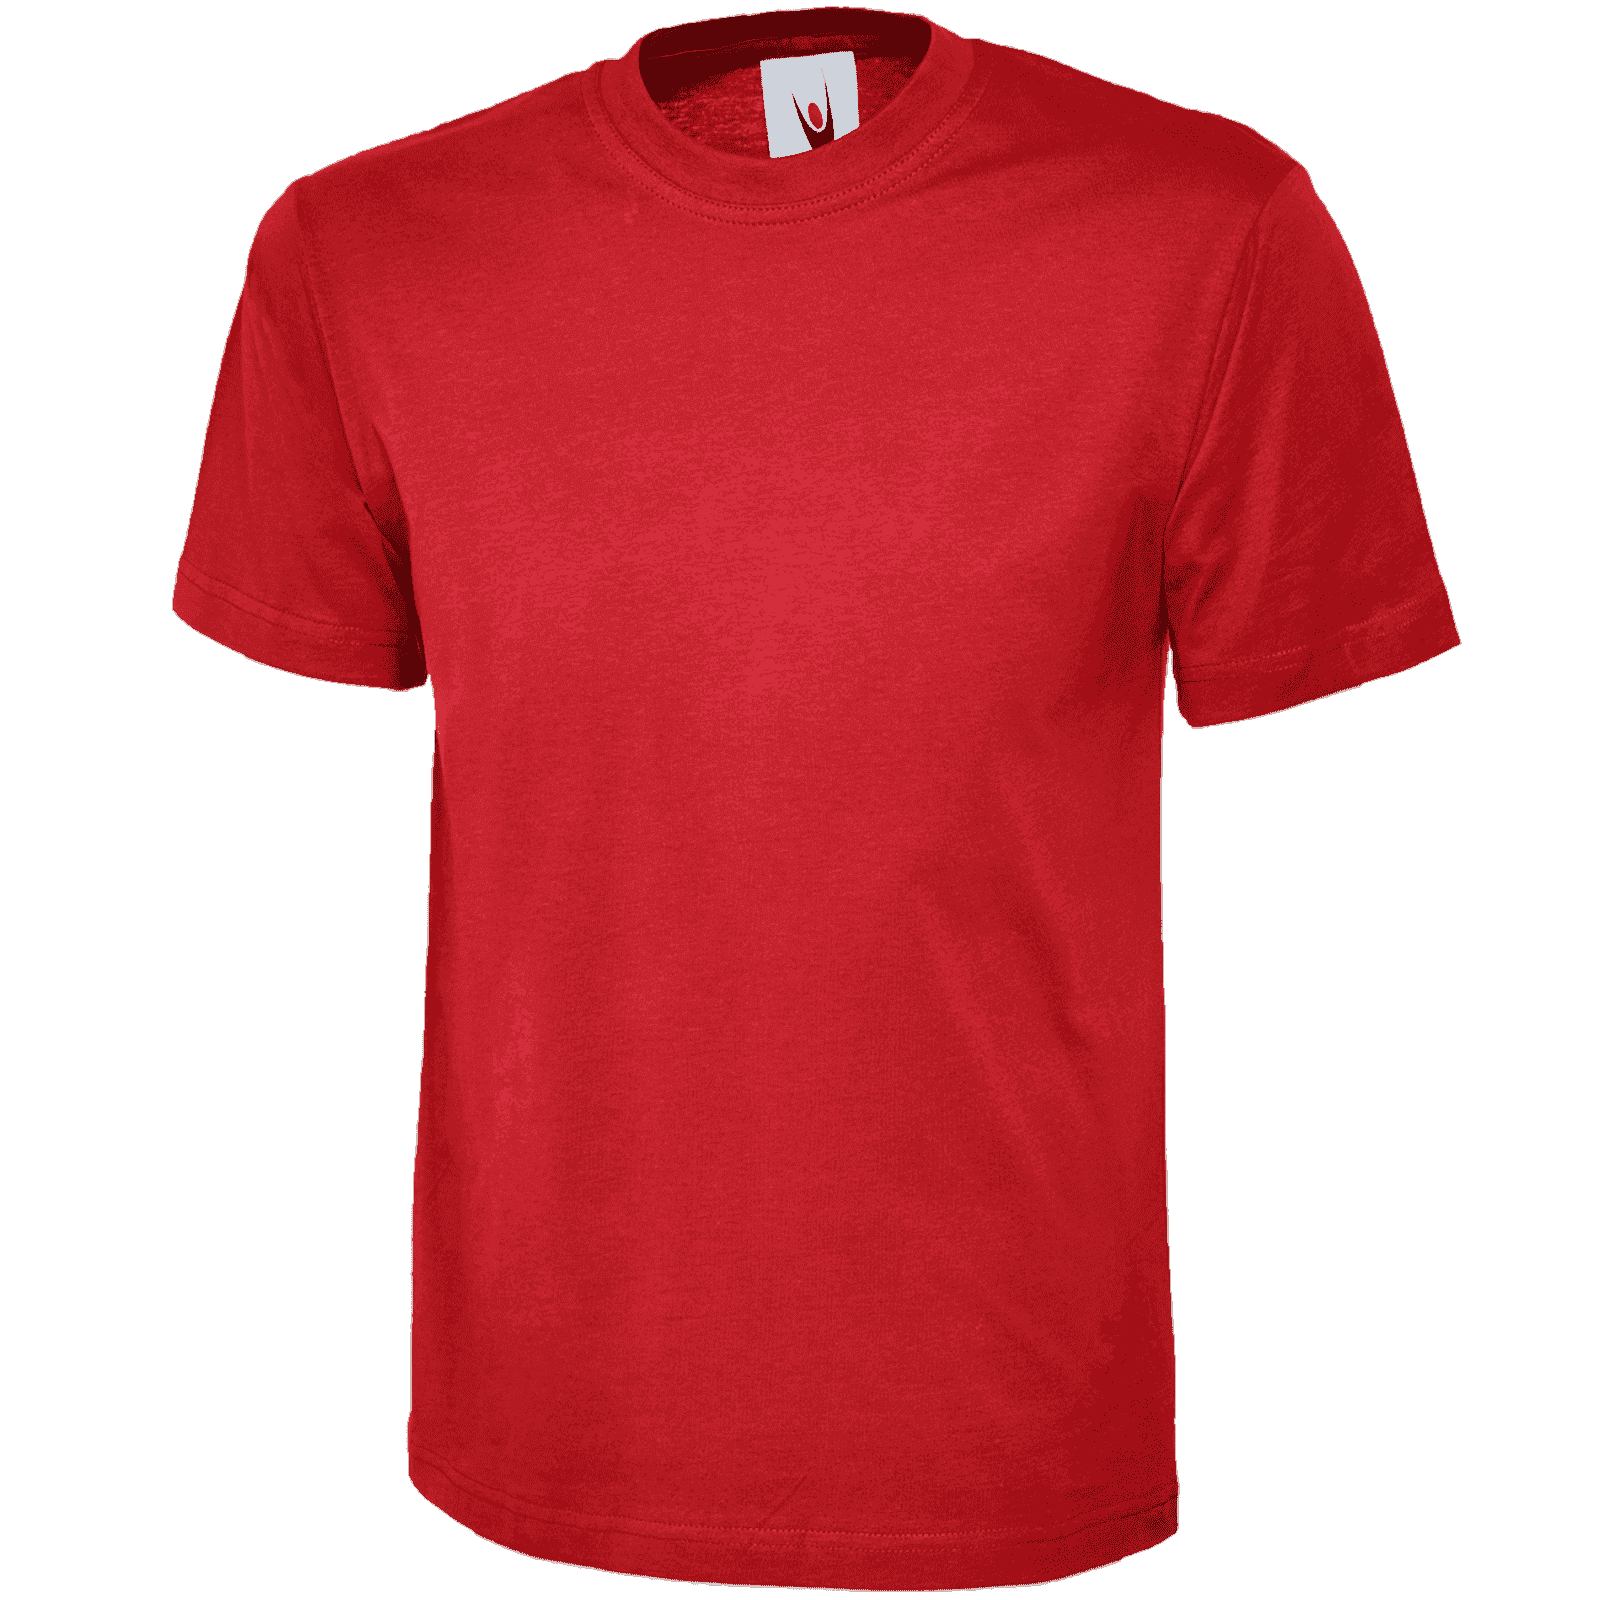 Classic Cotton Work T-Shirt UC301 Uneek Red